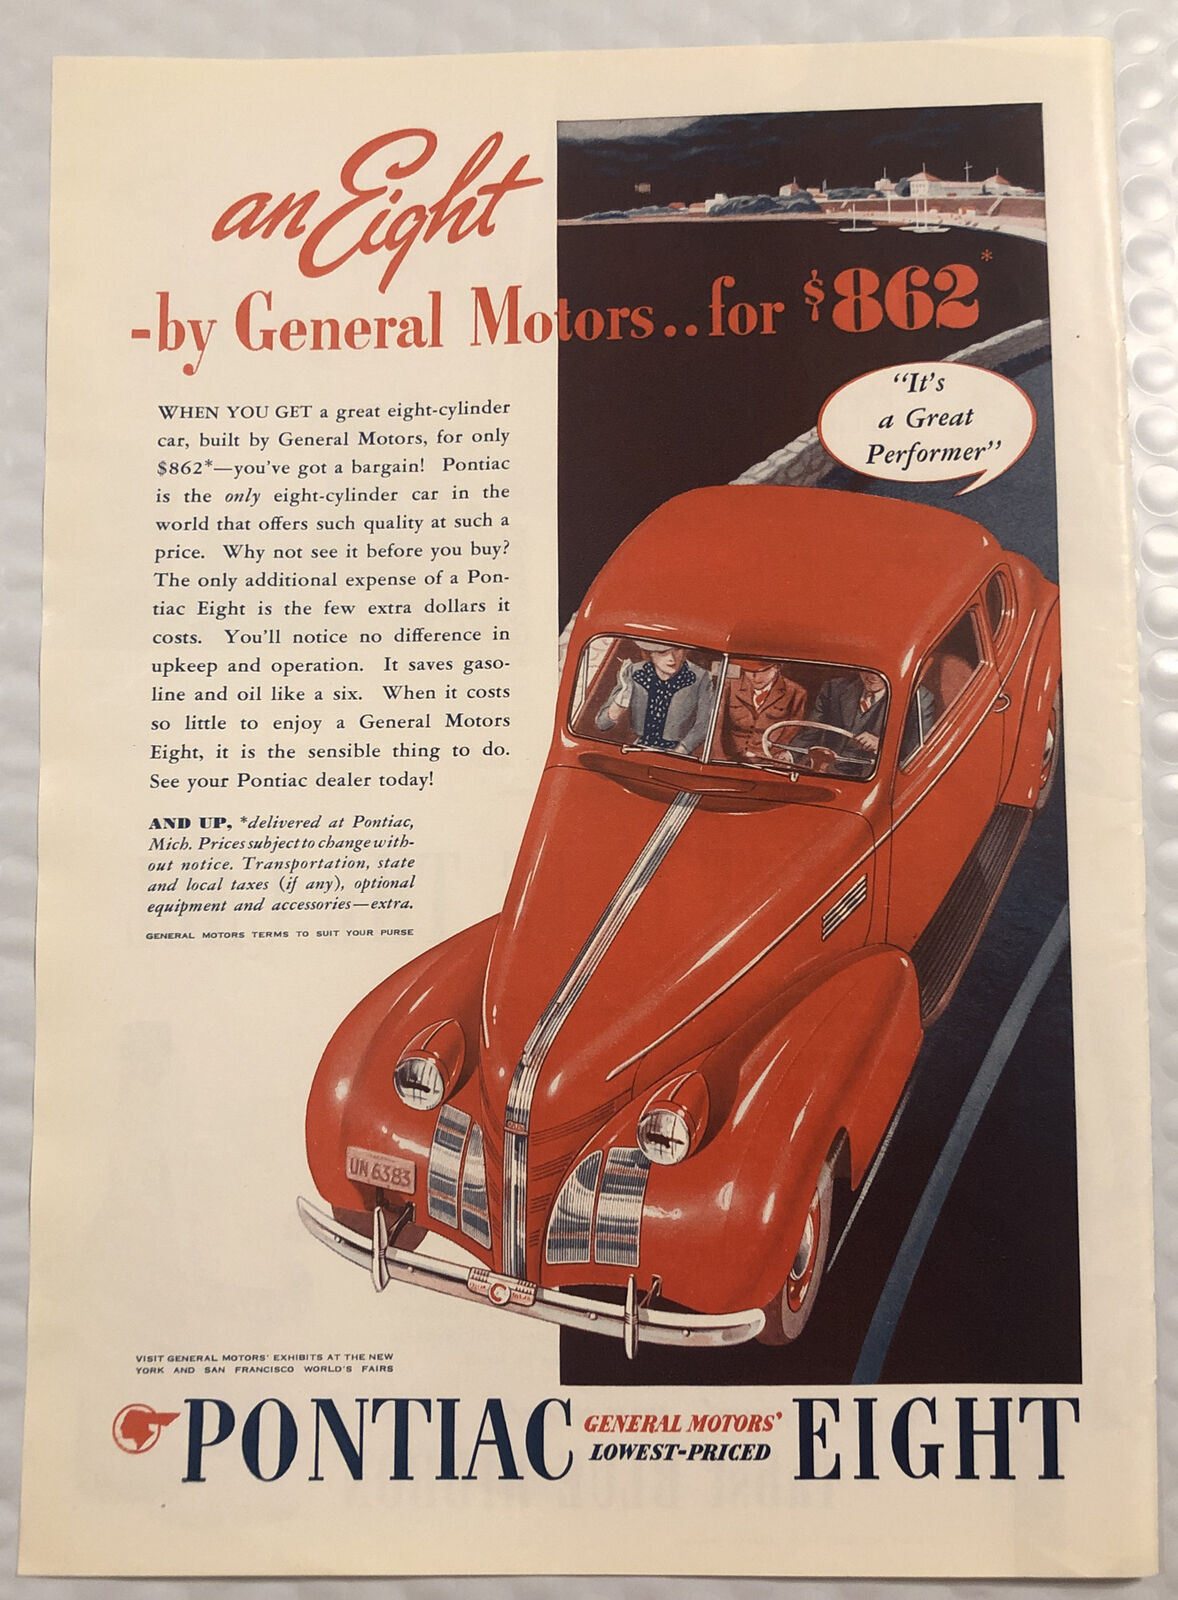 Vintage 1939 Pontiac Eight Print Ad - Full Page - It’s A Great Performer